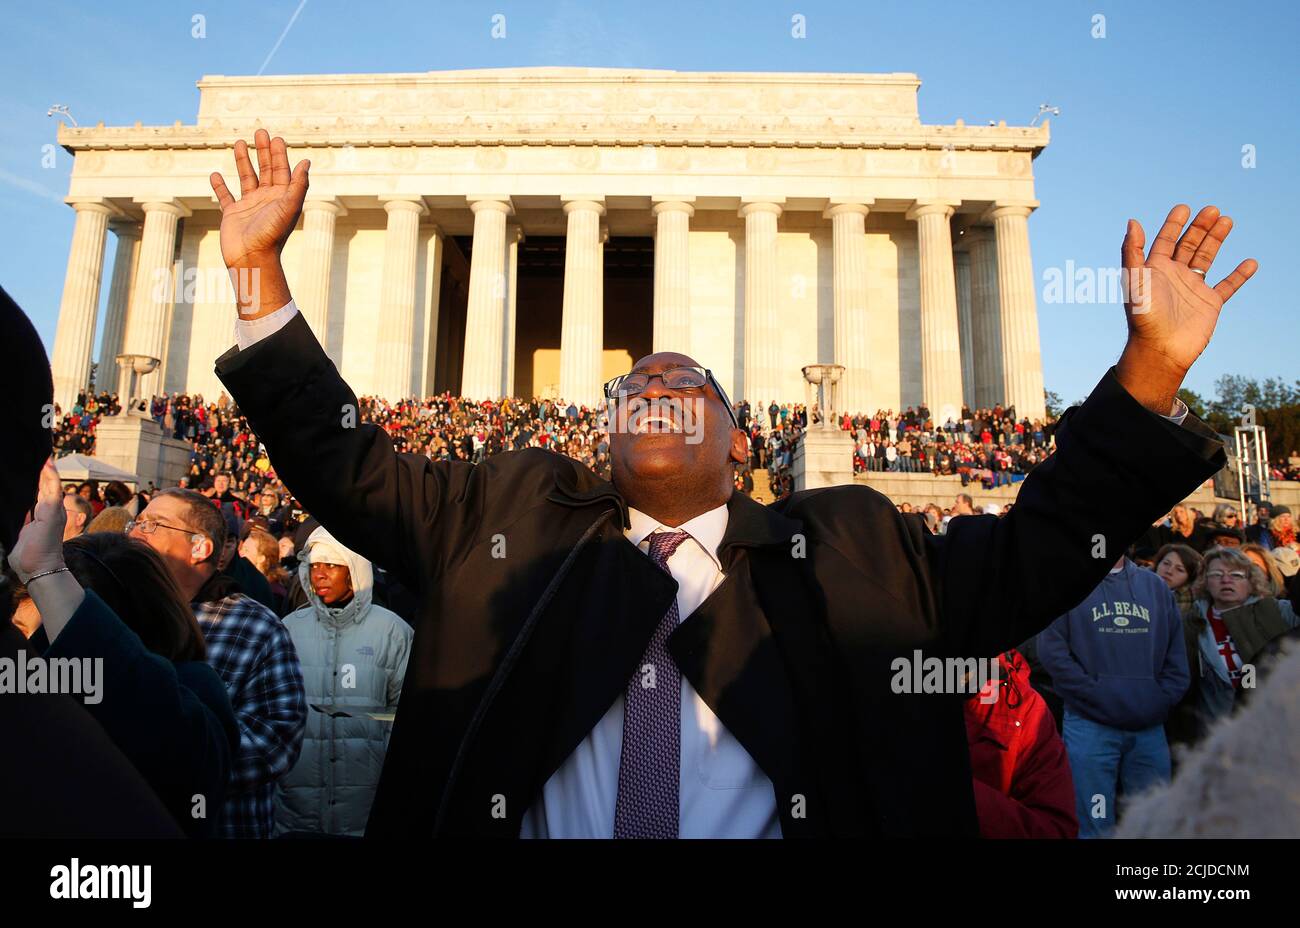 Christians pray during an Easter morning sunrise religious service on the steps of the Lincoln Memorial in Washington April 5, 2015. Organizers said an estimated 8,900 people attended the 37th occurrence of the annual event in front of the memorial which was dedicated to the former president in 1922. On April 15, the United States commemorates the 150th anniversary of President Abraham Lincoln's assassination. REUTERS/Jim Bourg Stock Photo